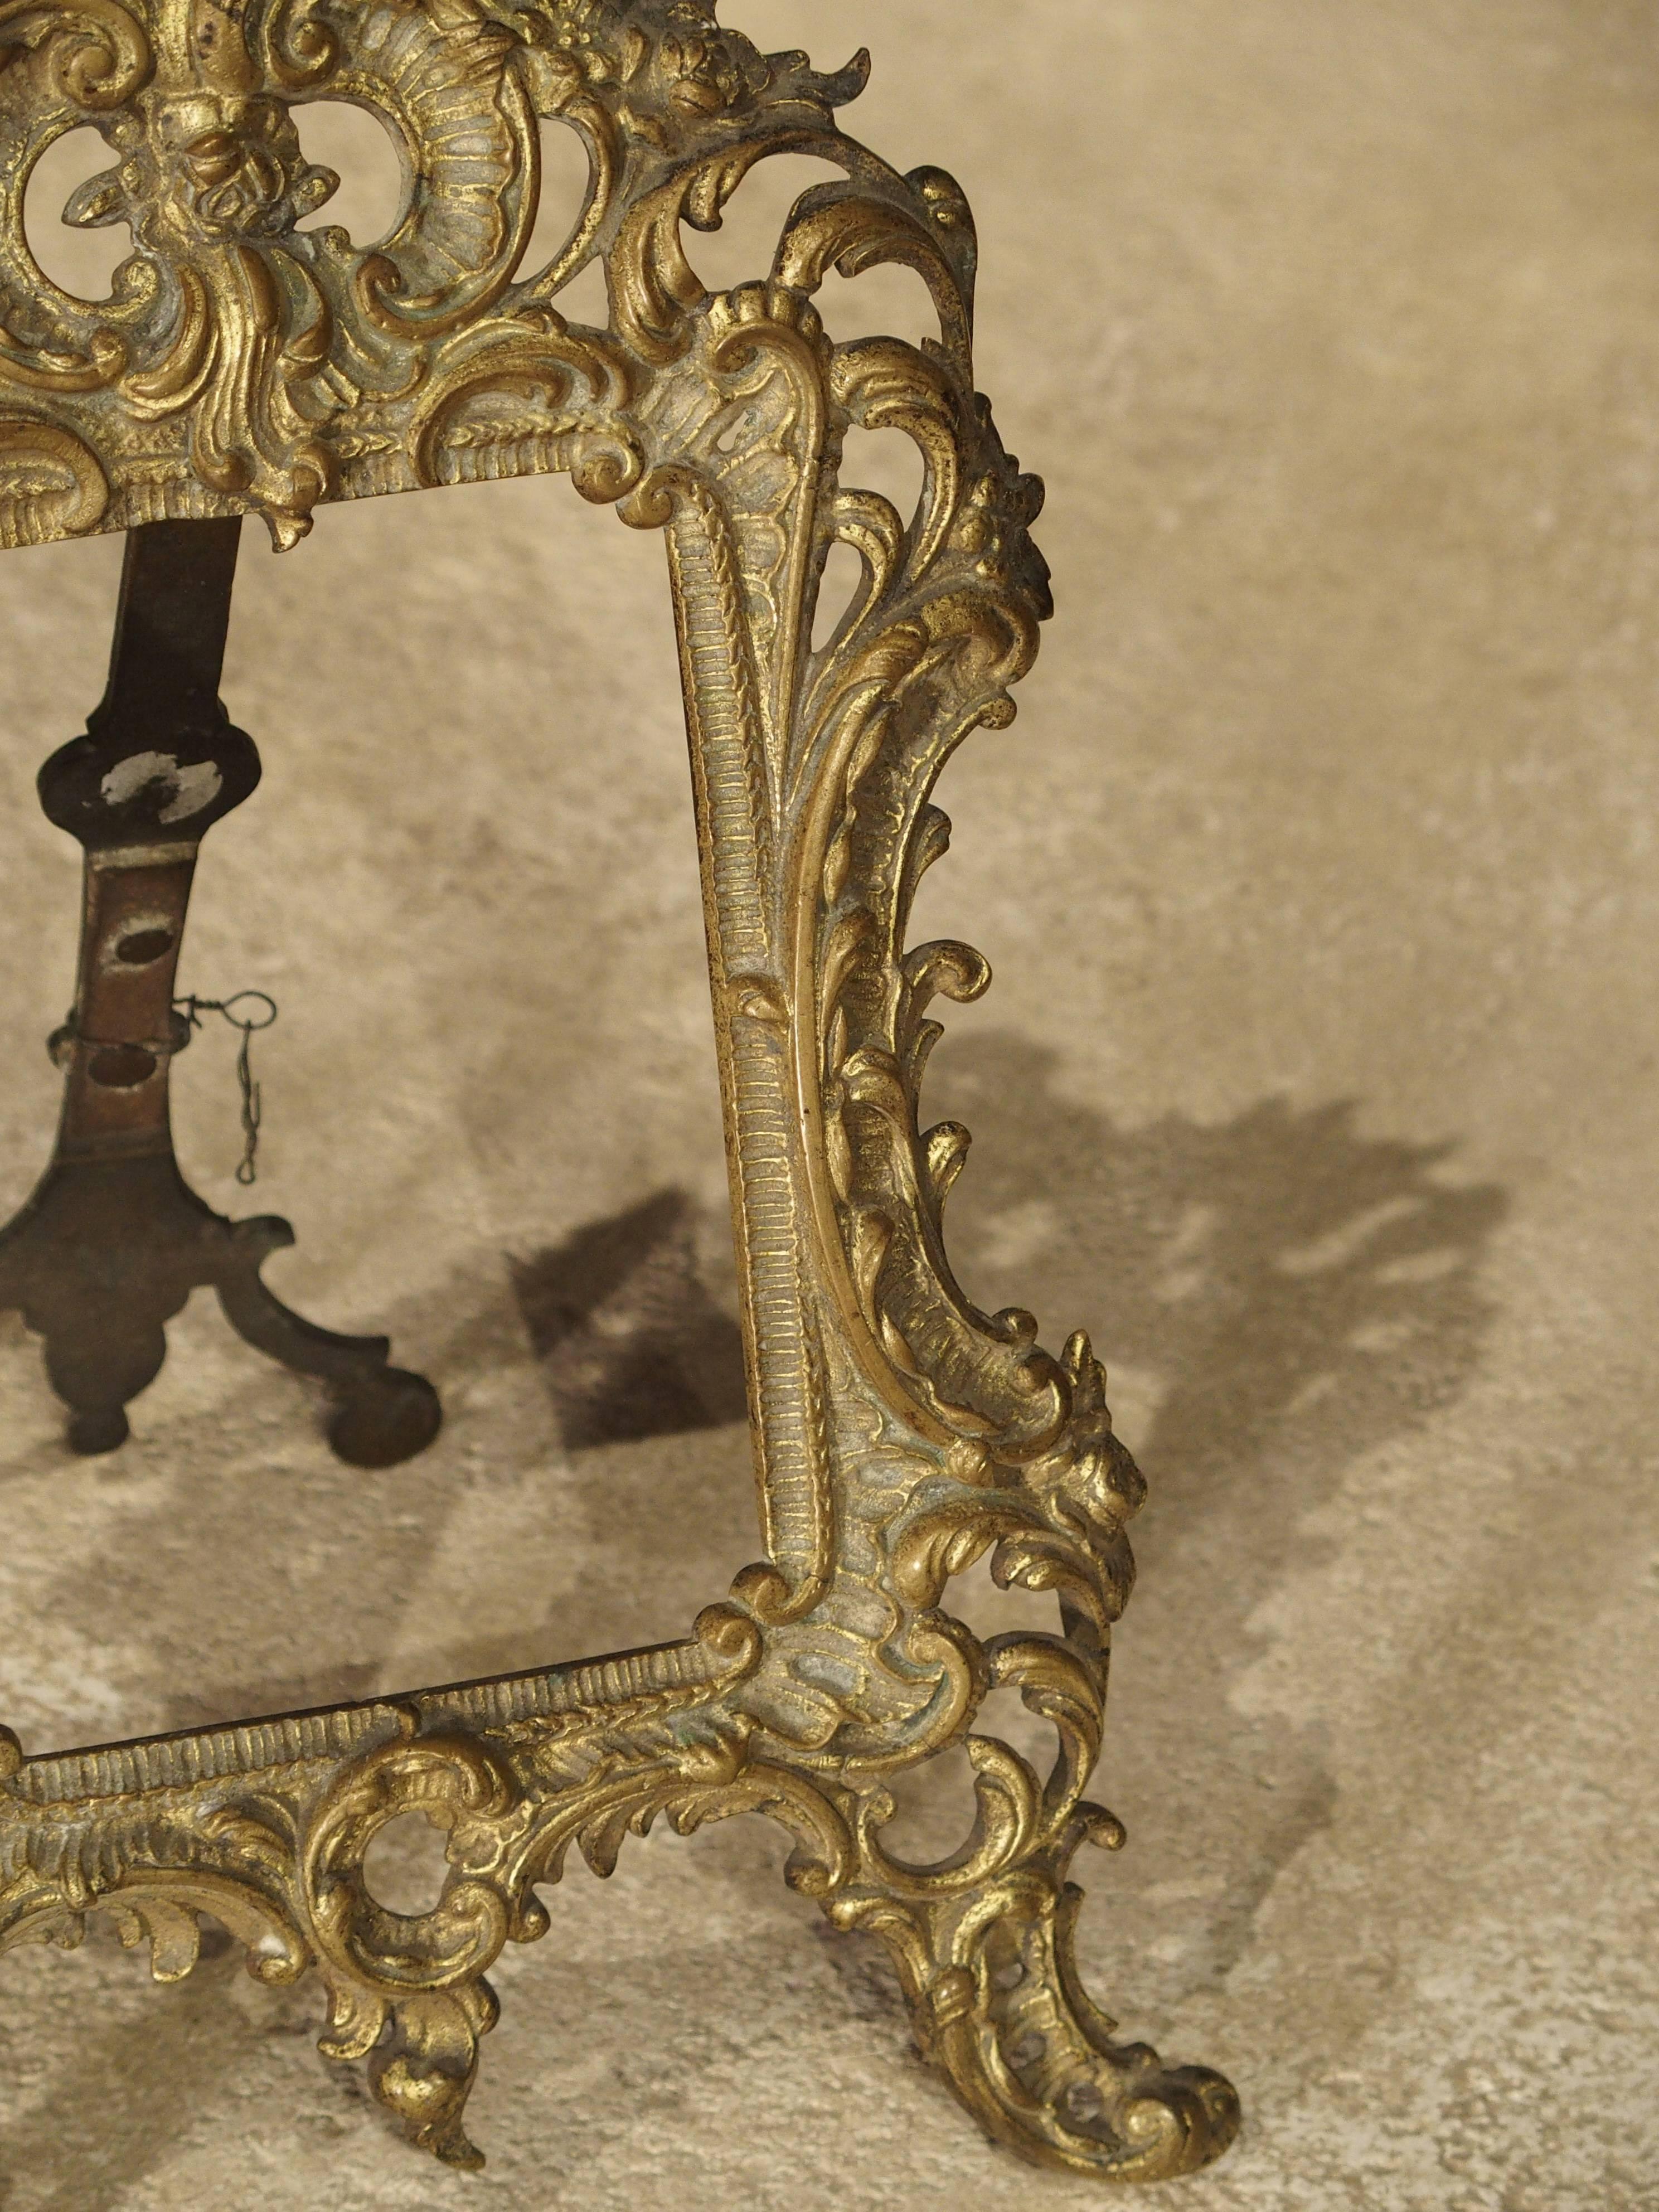 This small antique French, Louis XV style picture frame is perfect for small paintings or photographs. It has all the motifs typical of the Louis XV style: stylized shells, gadrooned leaves C and S scrolls, acanthus leaves, and flowers. Perfect for